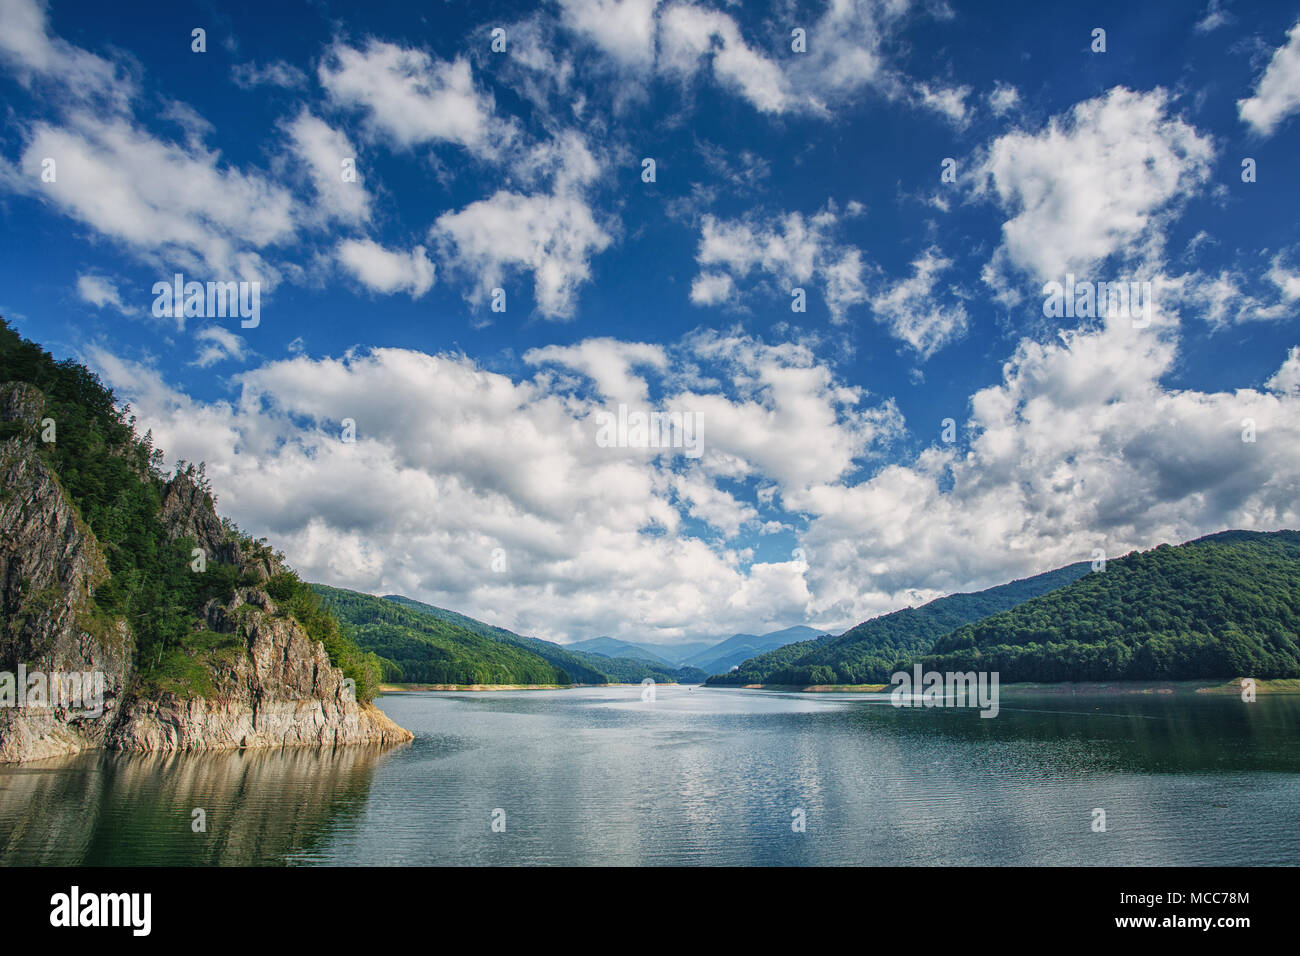 Mountain lake. Scenic landscape. Beautiful blue sky with clouds Stock Photo